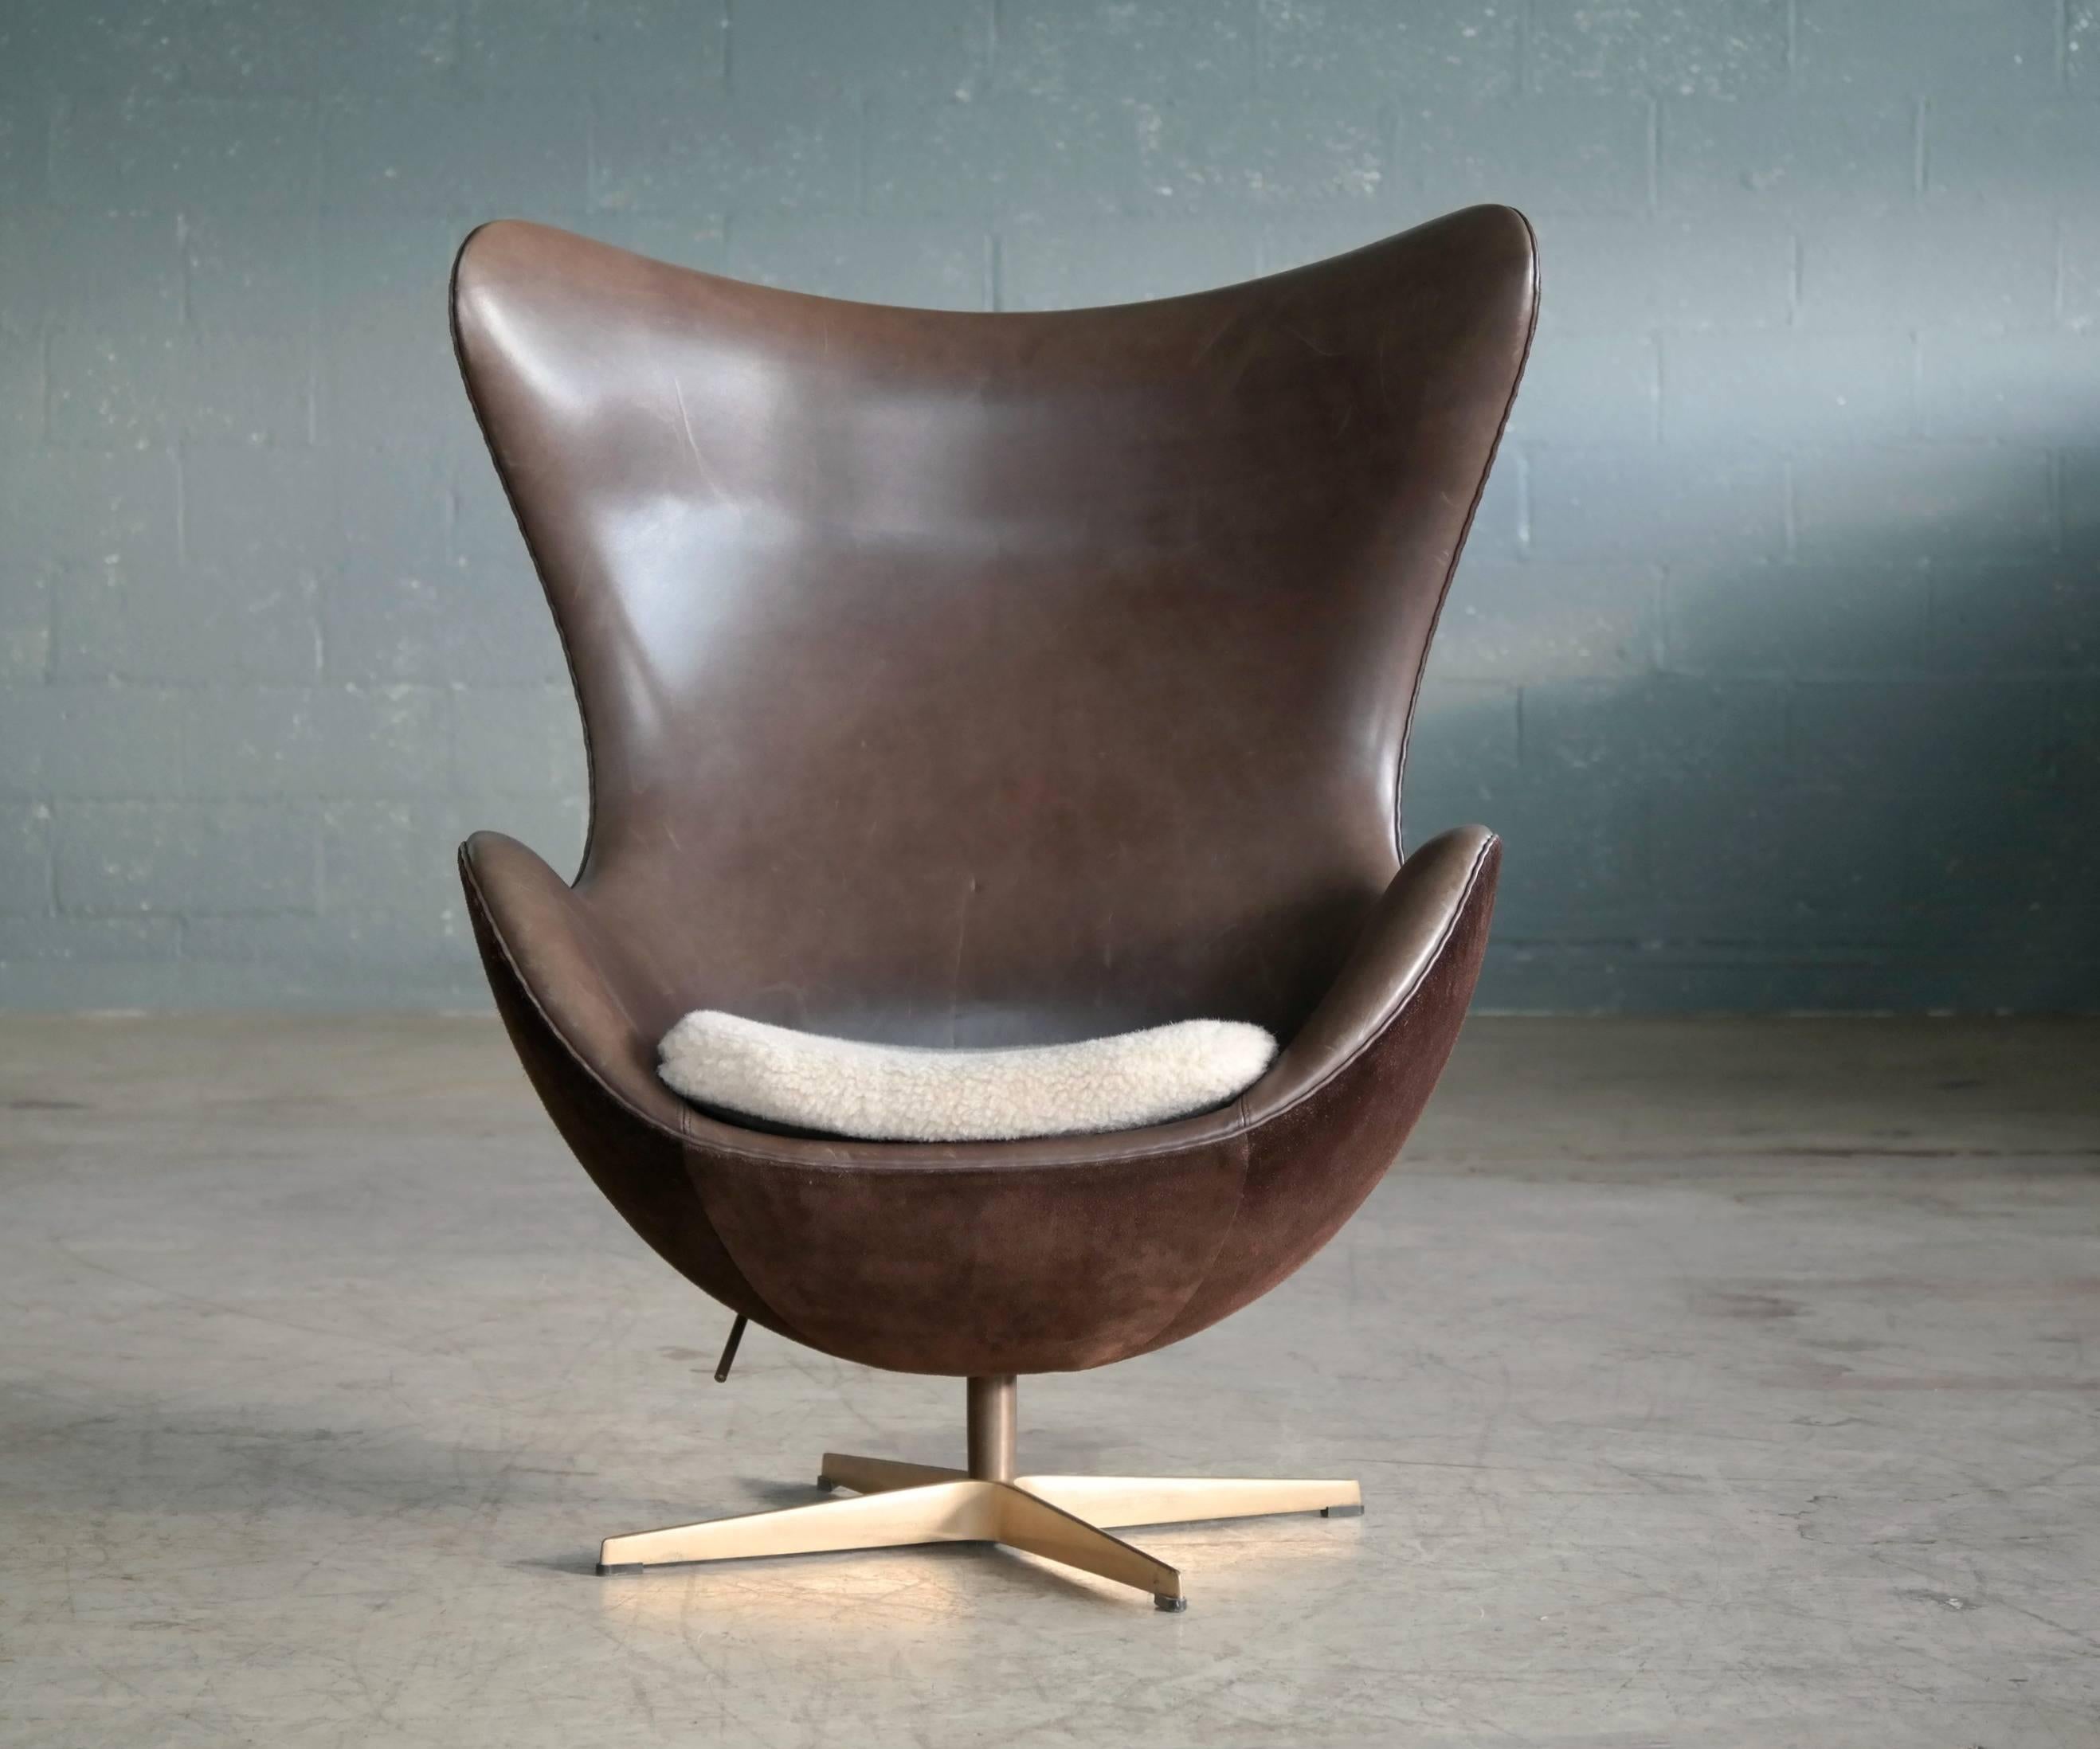 A rare very special edition of the famous Egg chair designed by Arne Jacobsen in 1958. This particular chair was number 811 out of a limited edition of 999 chairs made available worldwide by Fritz Hansen to celebrate the 50th anniversary of the